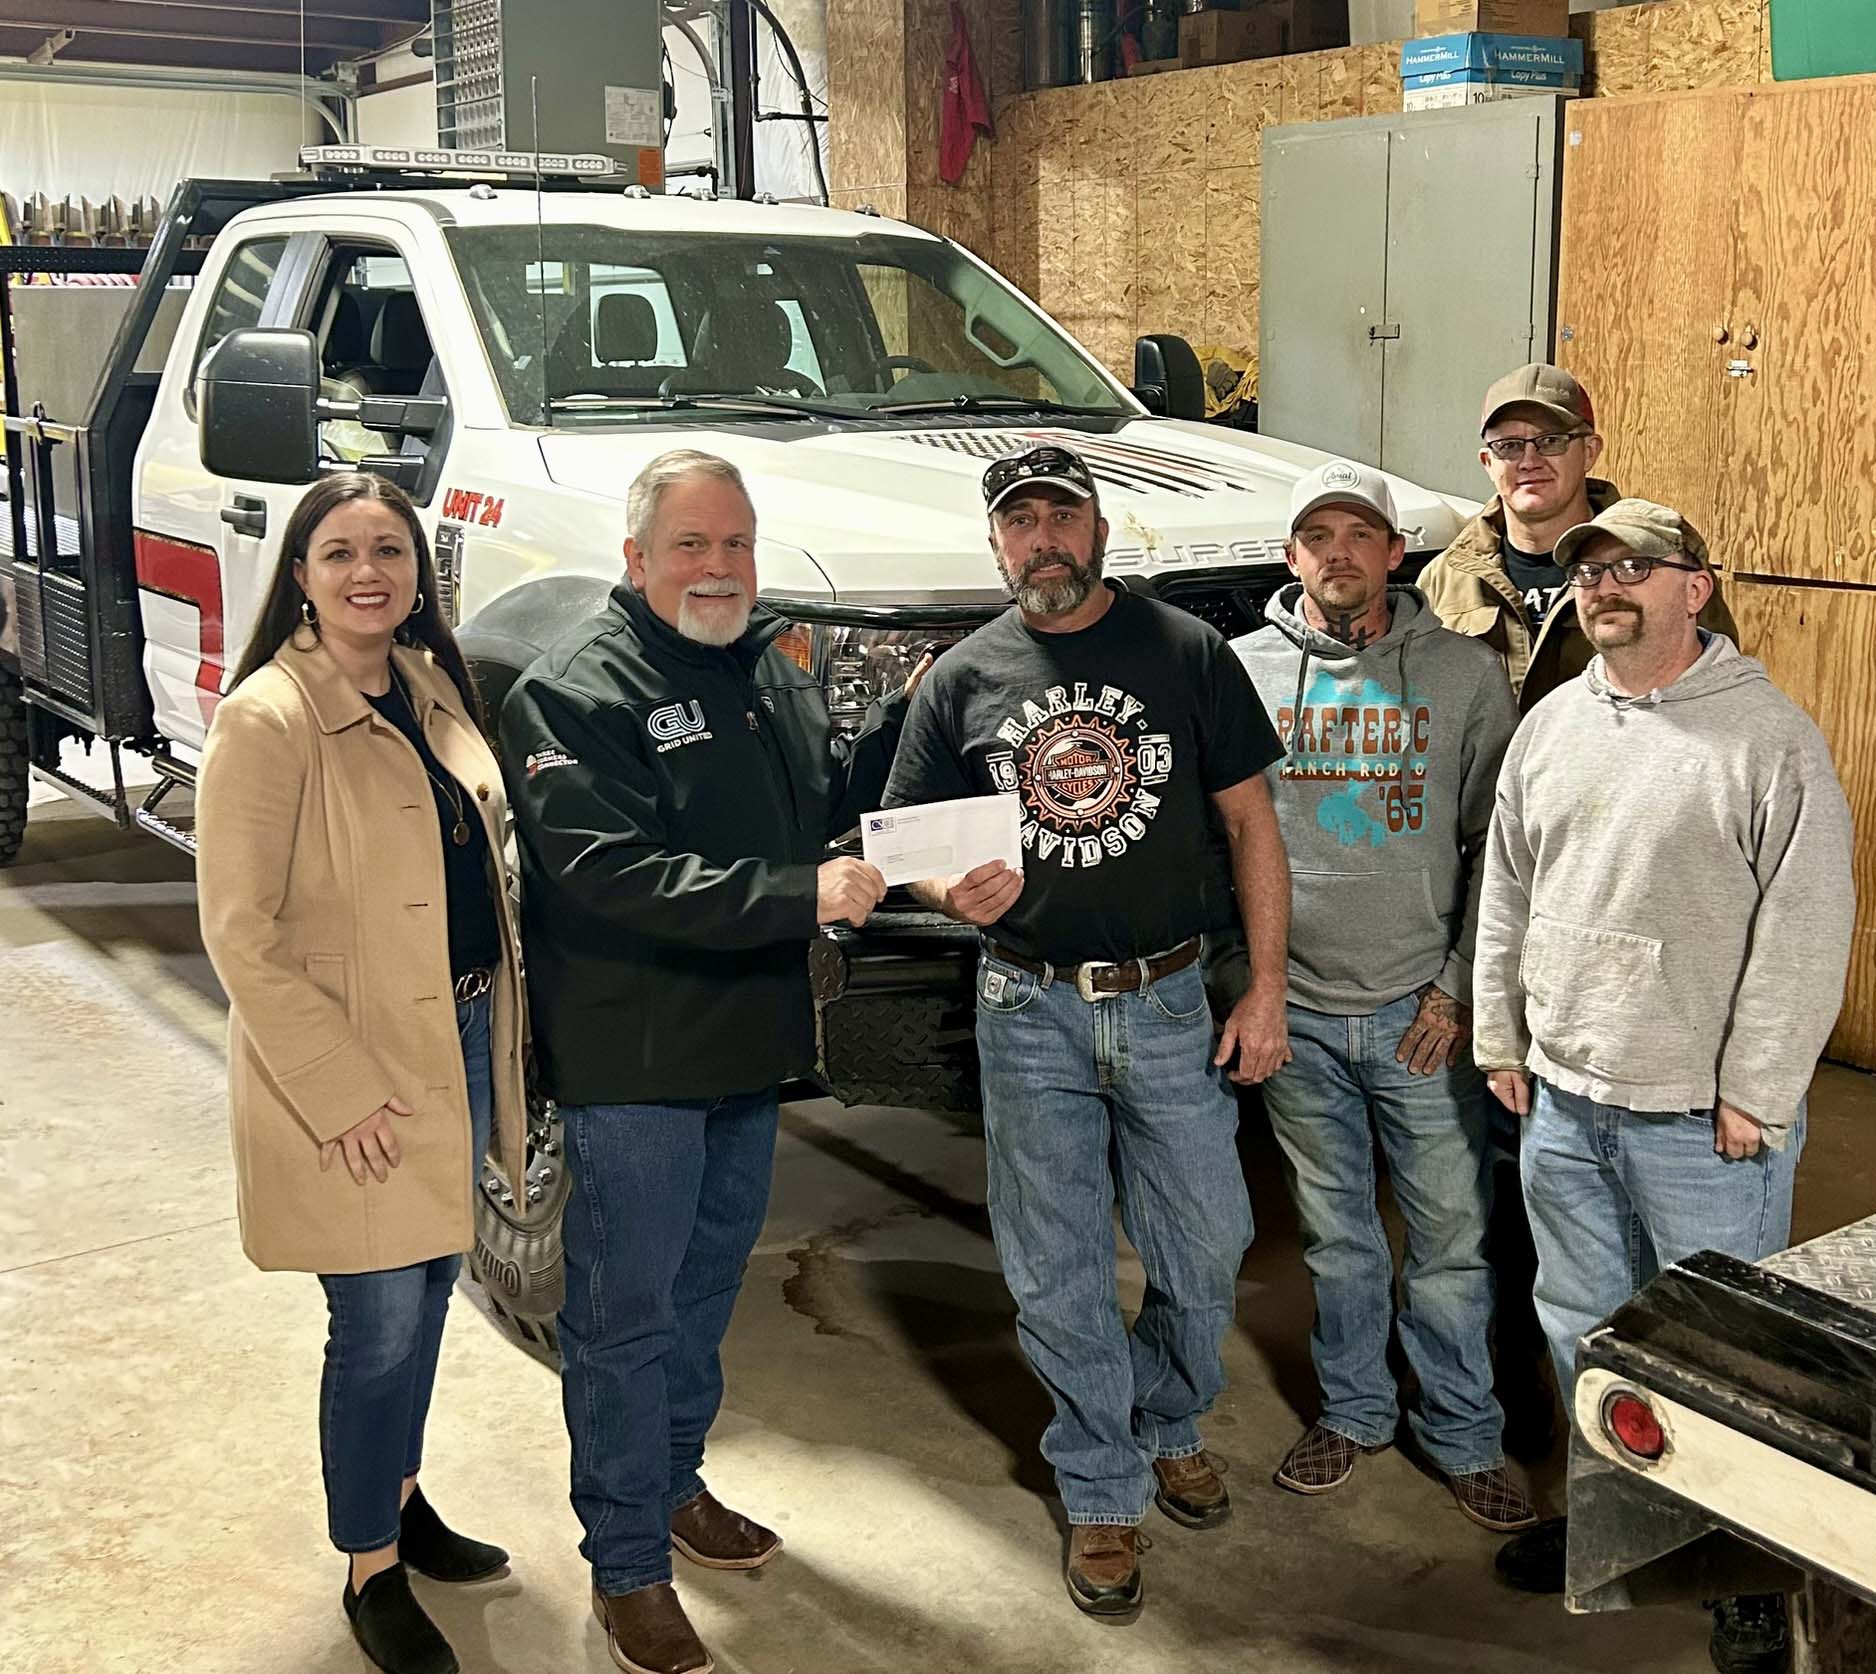 Keyes Fire Department - pictured left to right - Carrie Sanders, CSCF Executive Director; Alan Manning, Three Corners Connector Project Communications Specialist; presents check to Wade Cryer, Fire Chief; Katon Haynes; Frank Dyck; Derek Foust, Assistant Chief